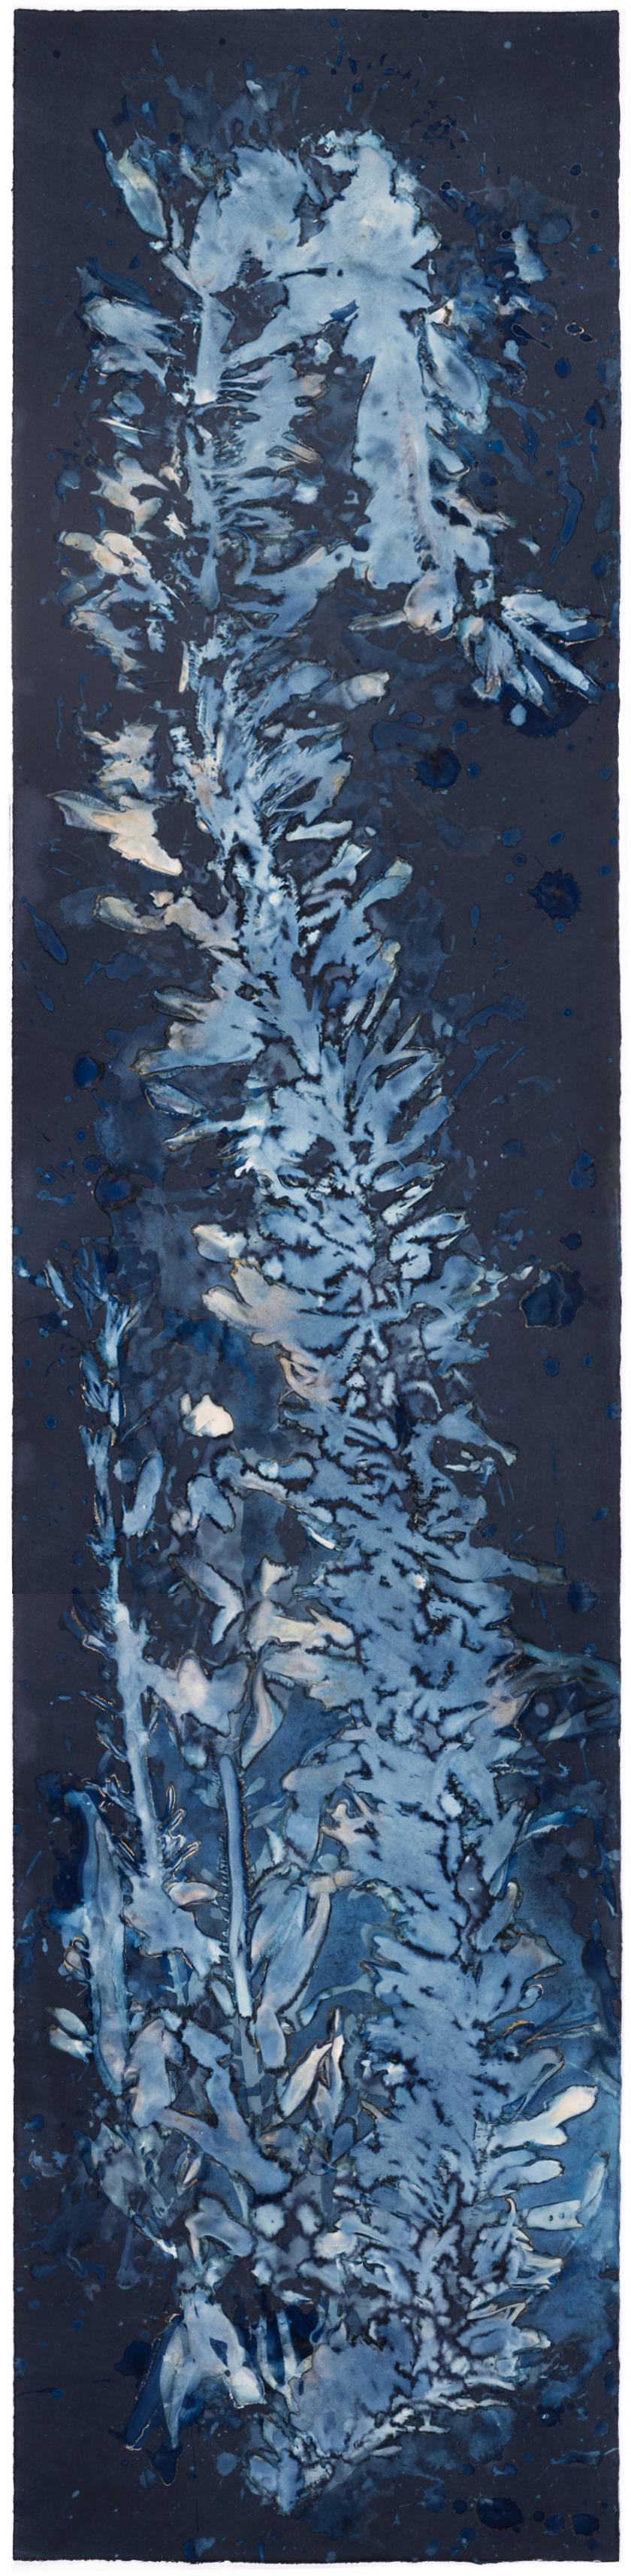 Paola Davila Abstract Photograph - Laminariales XIII. From the series Bosque Cyanotype photograph 